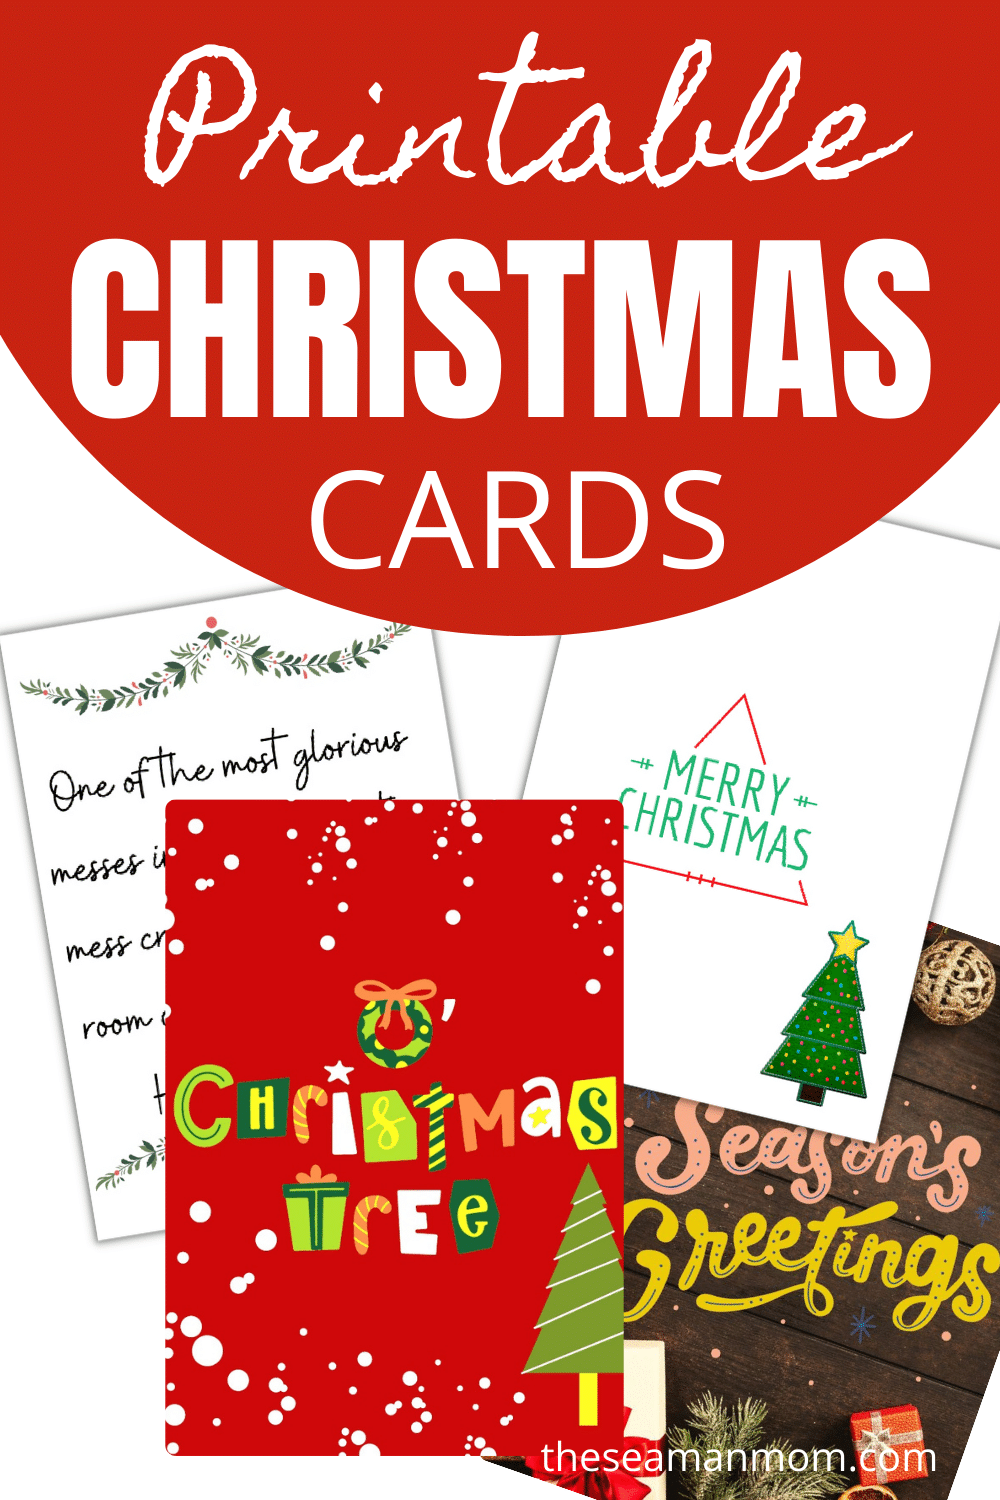 Easy PRINTABLE CHRISTMAS CARDS Easy Peasy Creative Ideas - Christmas Cards For Grandparents Free Printable